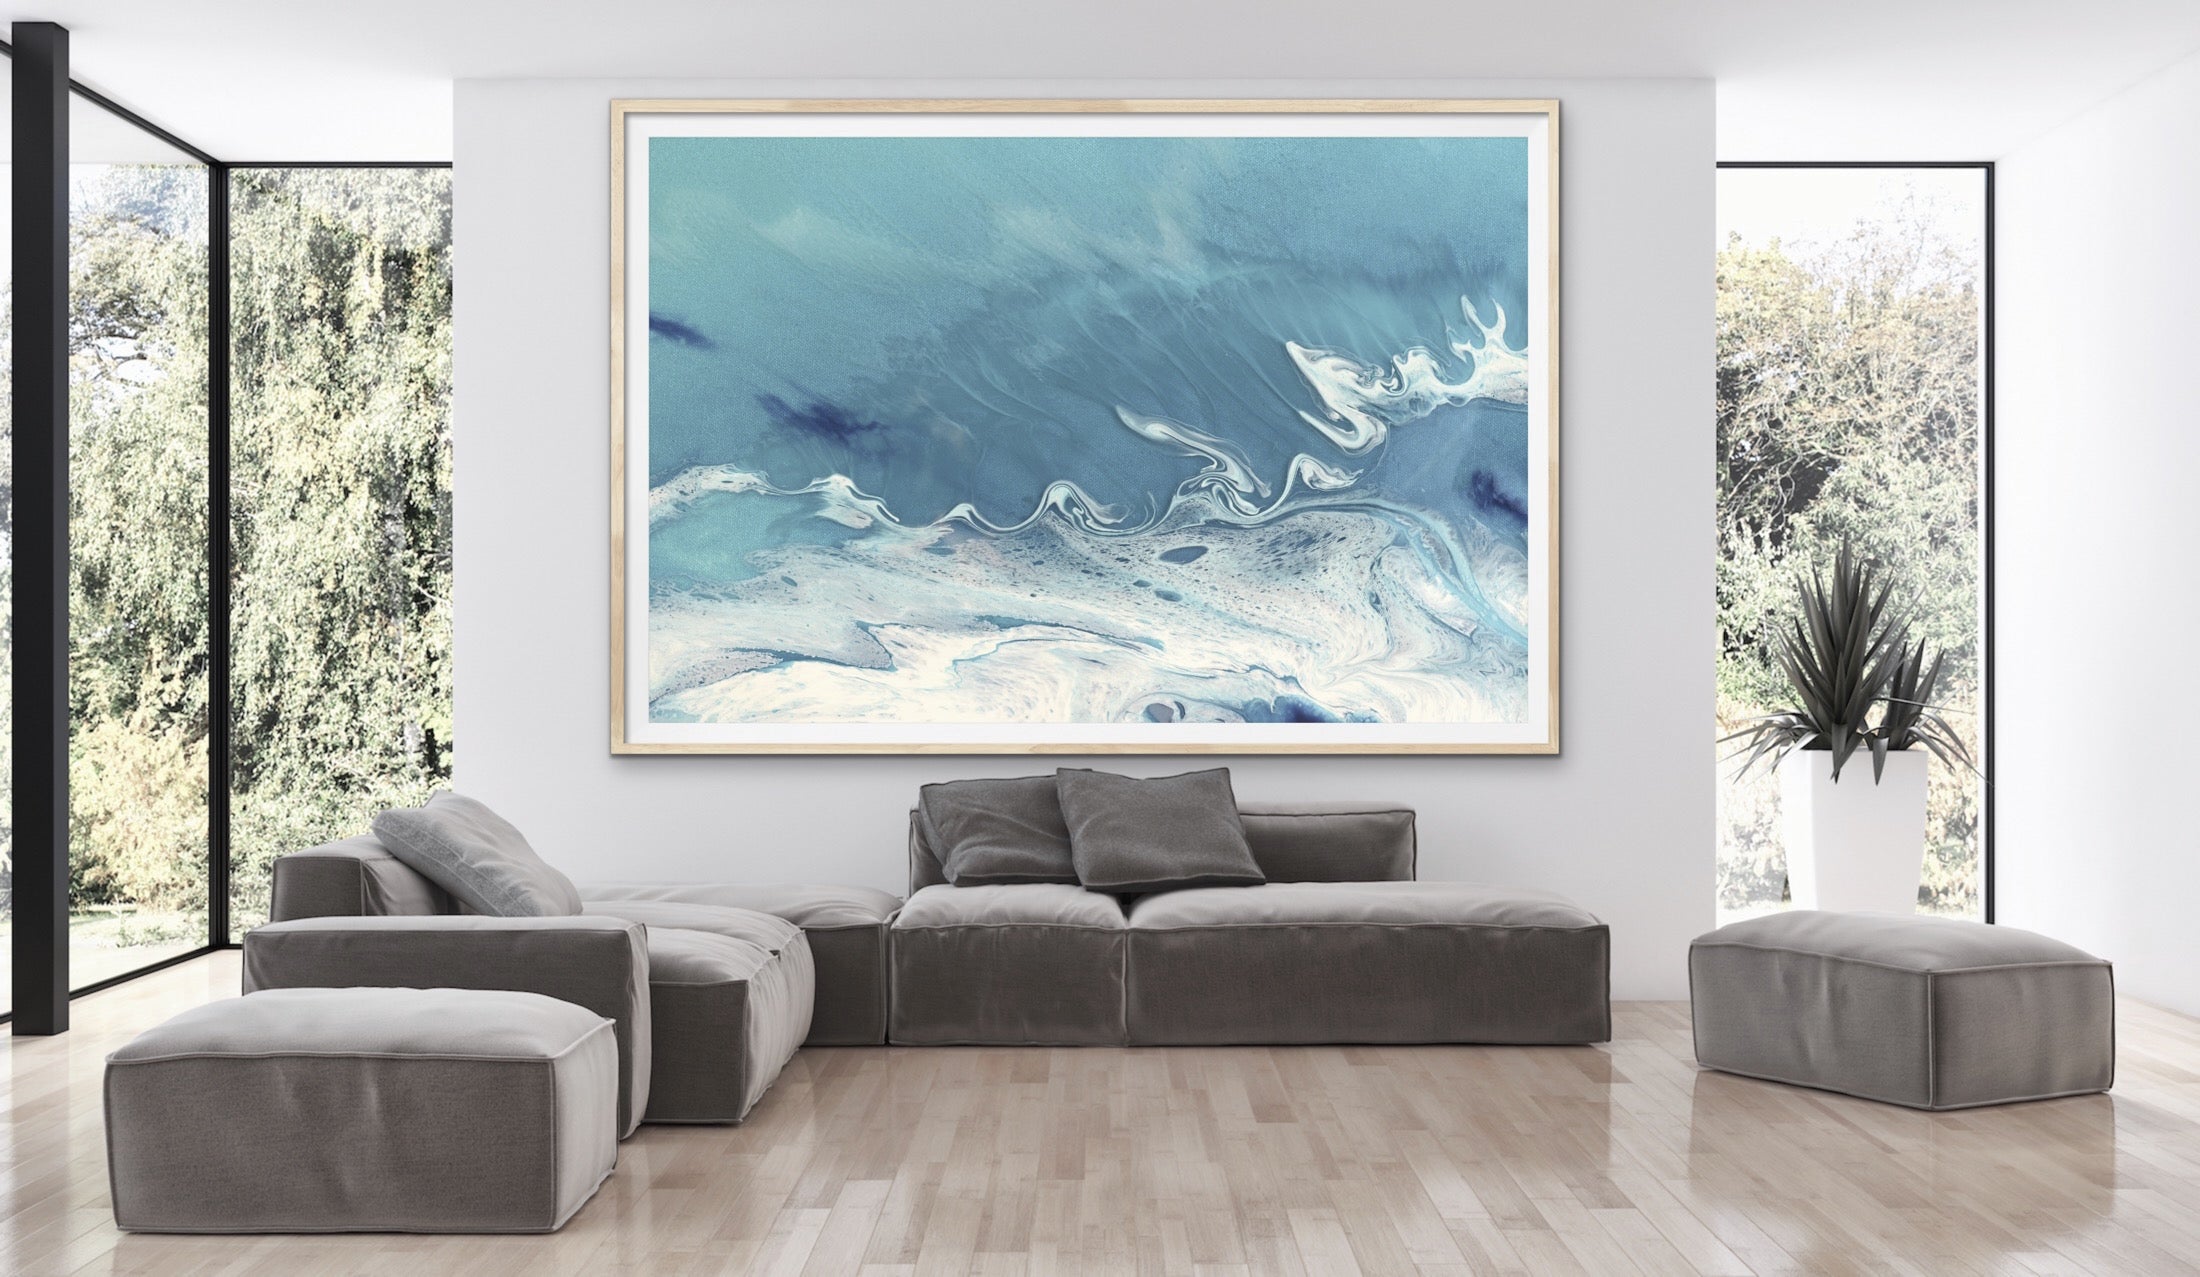 Pastel Abstract Artwork. Bali Utopia Grey Sky. Art Print. Antuanelle 4 Neutral Limited Edition Print